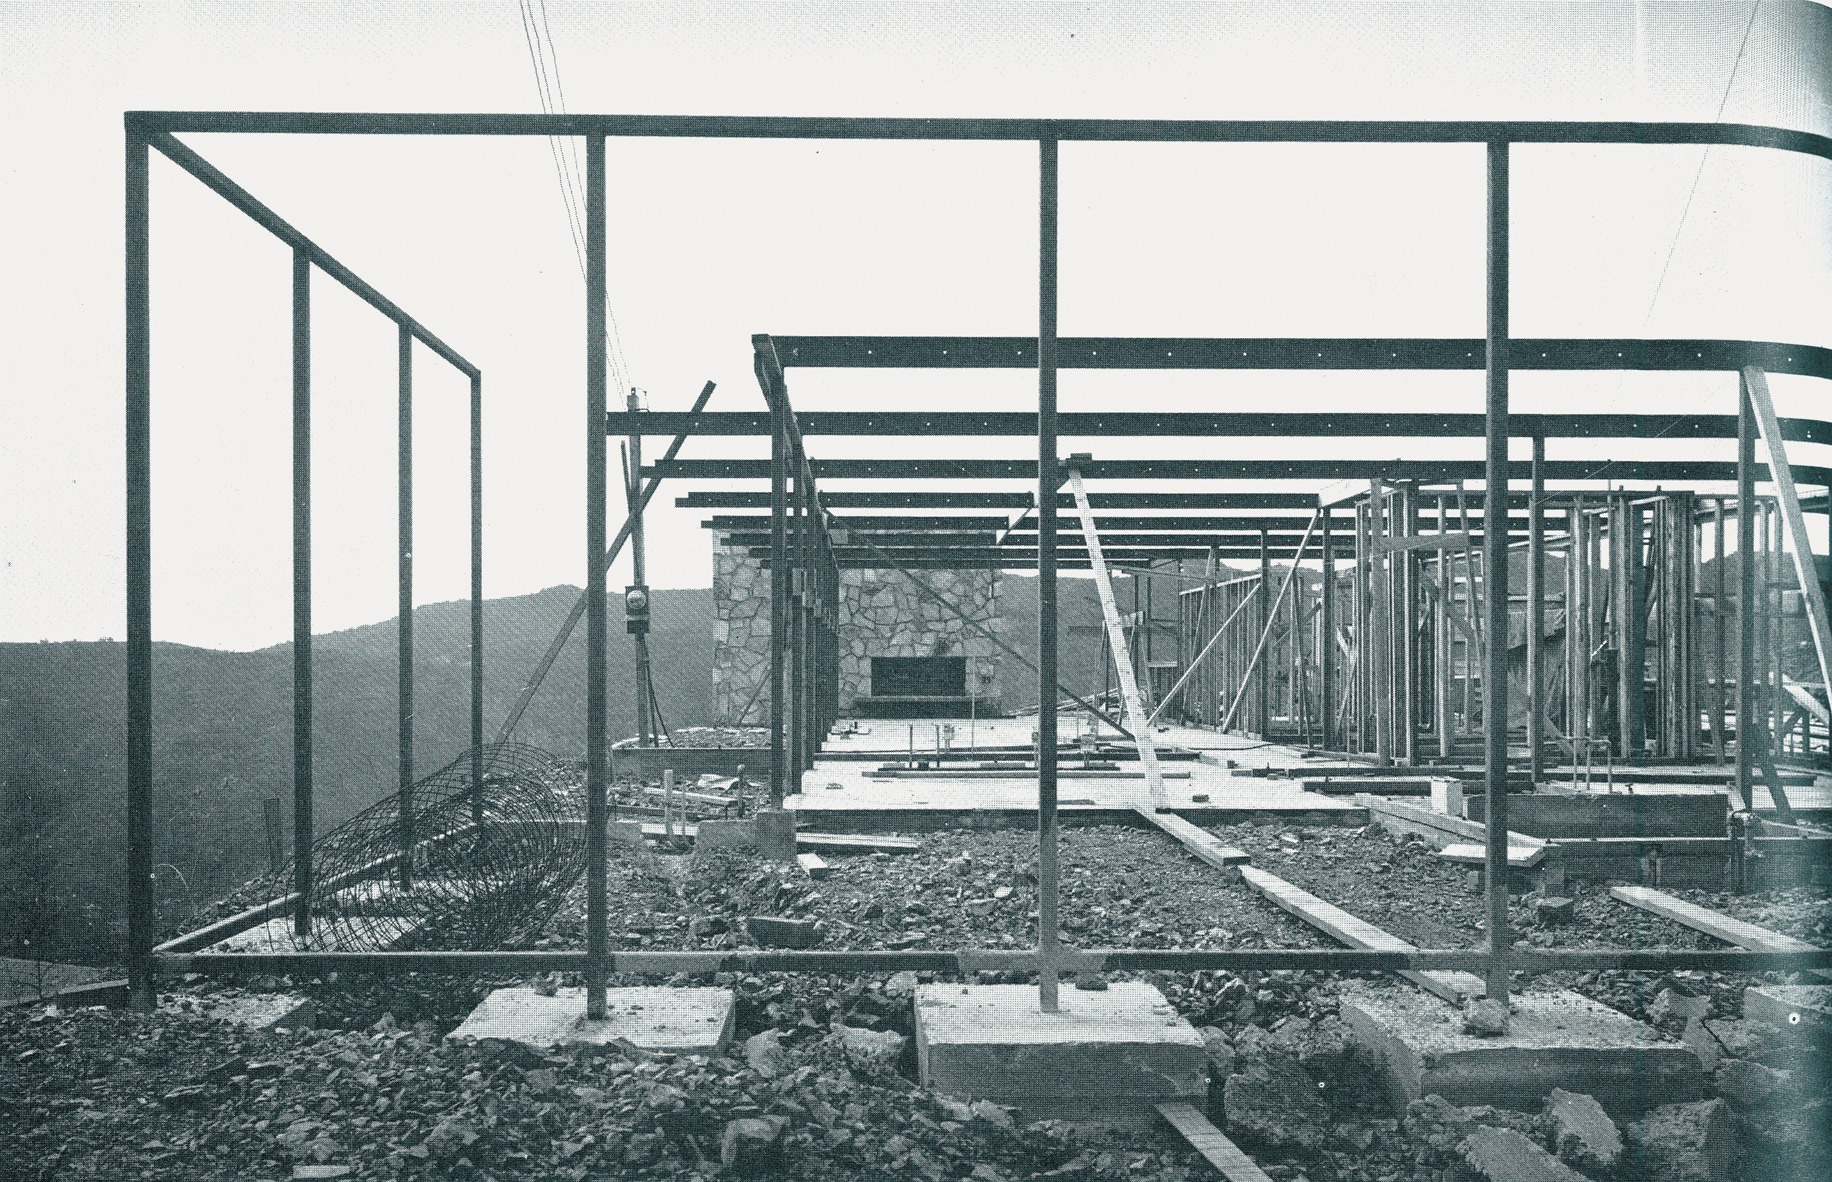 Construction of the steel frame in Craig Ellwood’s house #16 (1951) as published in _Arts and Architecture_.